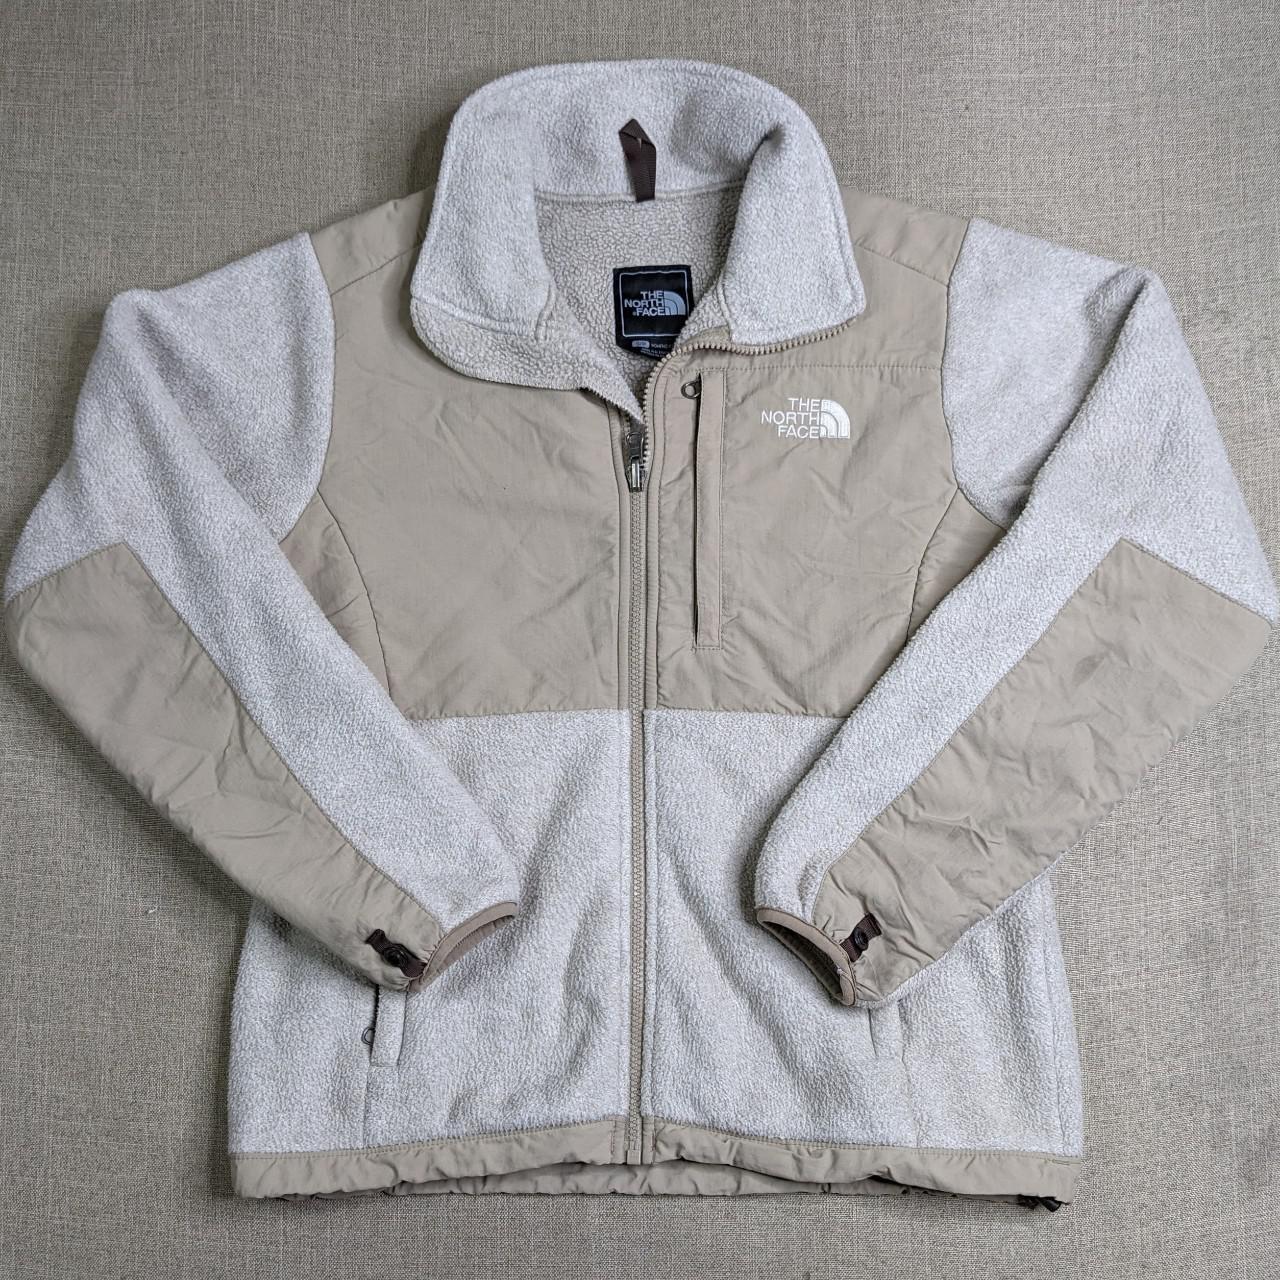 The North Face Women's Cream and Tan Jacket